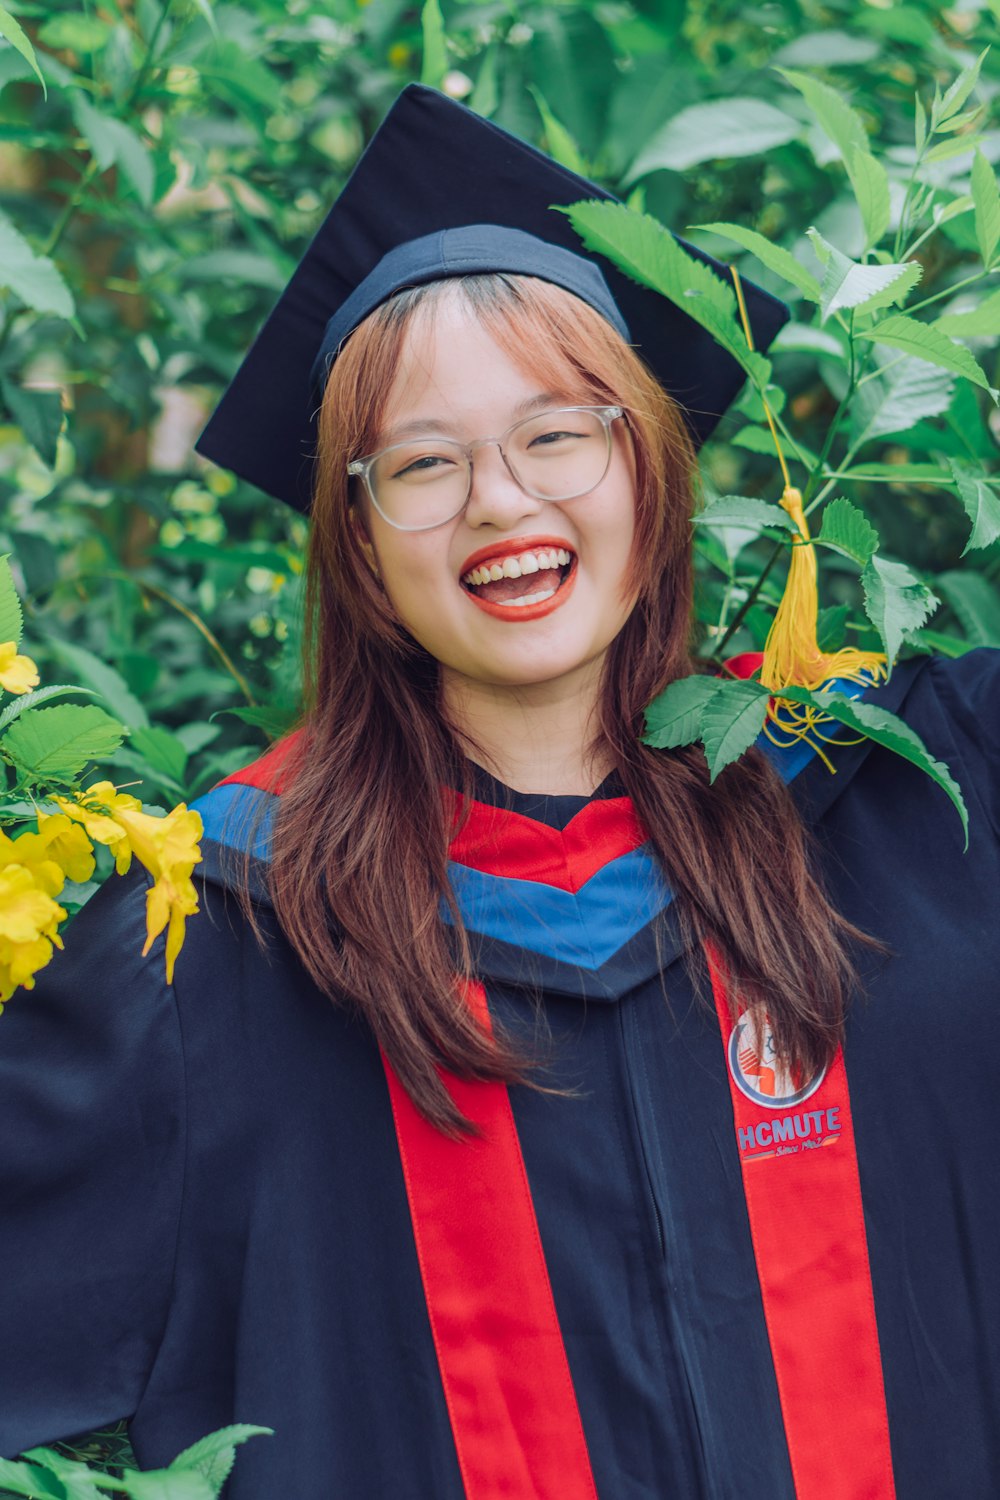 smiling woman in black academic dress and red scarf